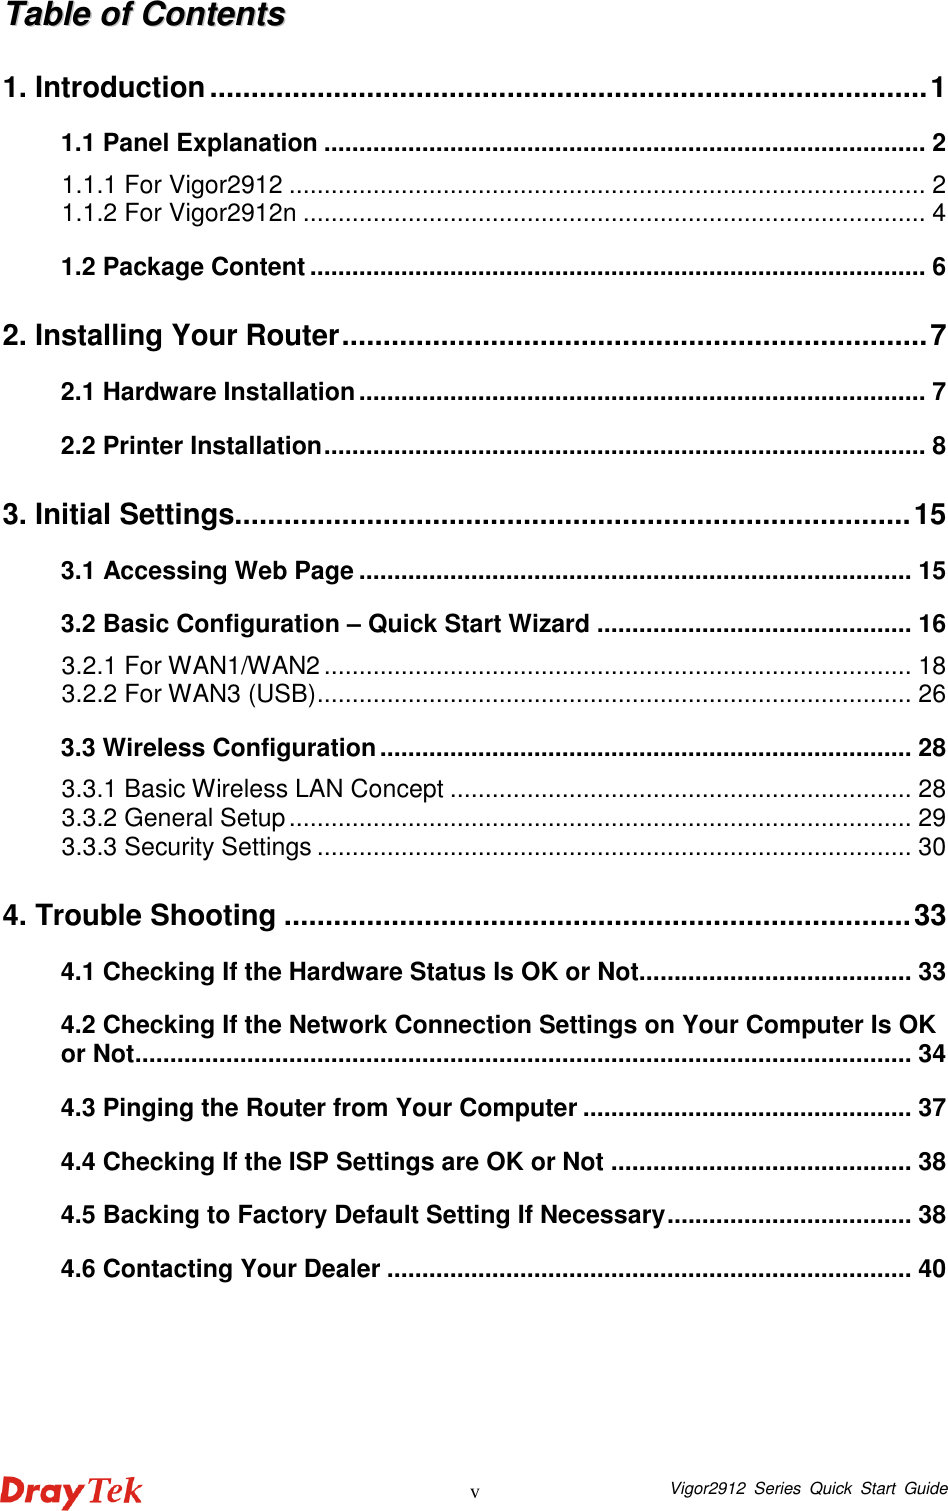  Vigor2912  Series  Quick  Start  Guide v TTaabbllee  ooff  CCoonntteennttss  1. Introduction.......................................................................................1 1.1 Panel Explanation ...................................................................................... 2 1.1.1 For Vigor2912 ........................................................................................... 2 1.1.2 For Vigor2912n ......................................................................................... 4 1.2 Package Content ........................................................................................ 6 2. Installing Your Router.......................................................................7 2.1 Hardware Installation................................................................................. 7 2.2 Printer Installation...................................................................................... 8 3. Initial Settings..................................................................................15 3.1 Accessing Web Page ............................................................................... 15 3.2 Basic Configuration – Quick Start Wizard ............................................. 16 3.2.1 For WAN1/WAN2.................................................................................... 18 3.2.2 For WAN3 (USB)..................................................................................... 26 3.3 Wireless Configuration............................................................................ 28 3.3.1 Basic Wireless LAN Concept .................................................................. 28 3.3.2 General Setup......................................................................................... 29 3.3.3 Security Settings ..................................................................................... 30 4. Trouble Shooting ............................................................................33 4.1 Checking If the Hardware Status Is OK or Not....................................... 33 4.2 Checking If the Network Connection Settings on Your Computer Is OK or Not............................................................................................................... 34 4.3 Pinging the Router from Your Computer ............................................... 37 4.4 Checking If the ISP Settings are OK or Not ........................................... 38 4.5 Backing to Factory Default Setting If Necessary................................... 38 4.6 Contacting Your Dealer ........................................................................... 40  